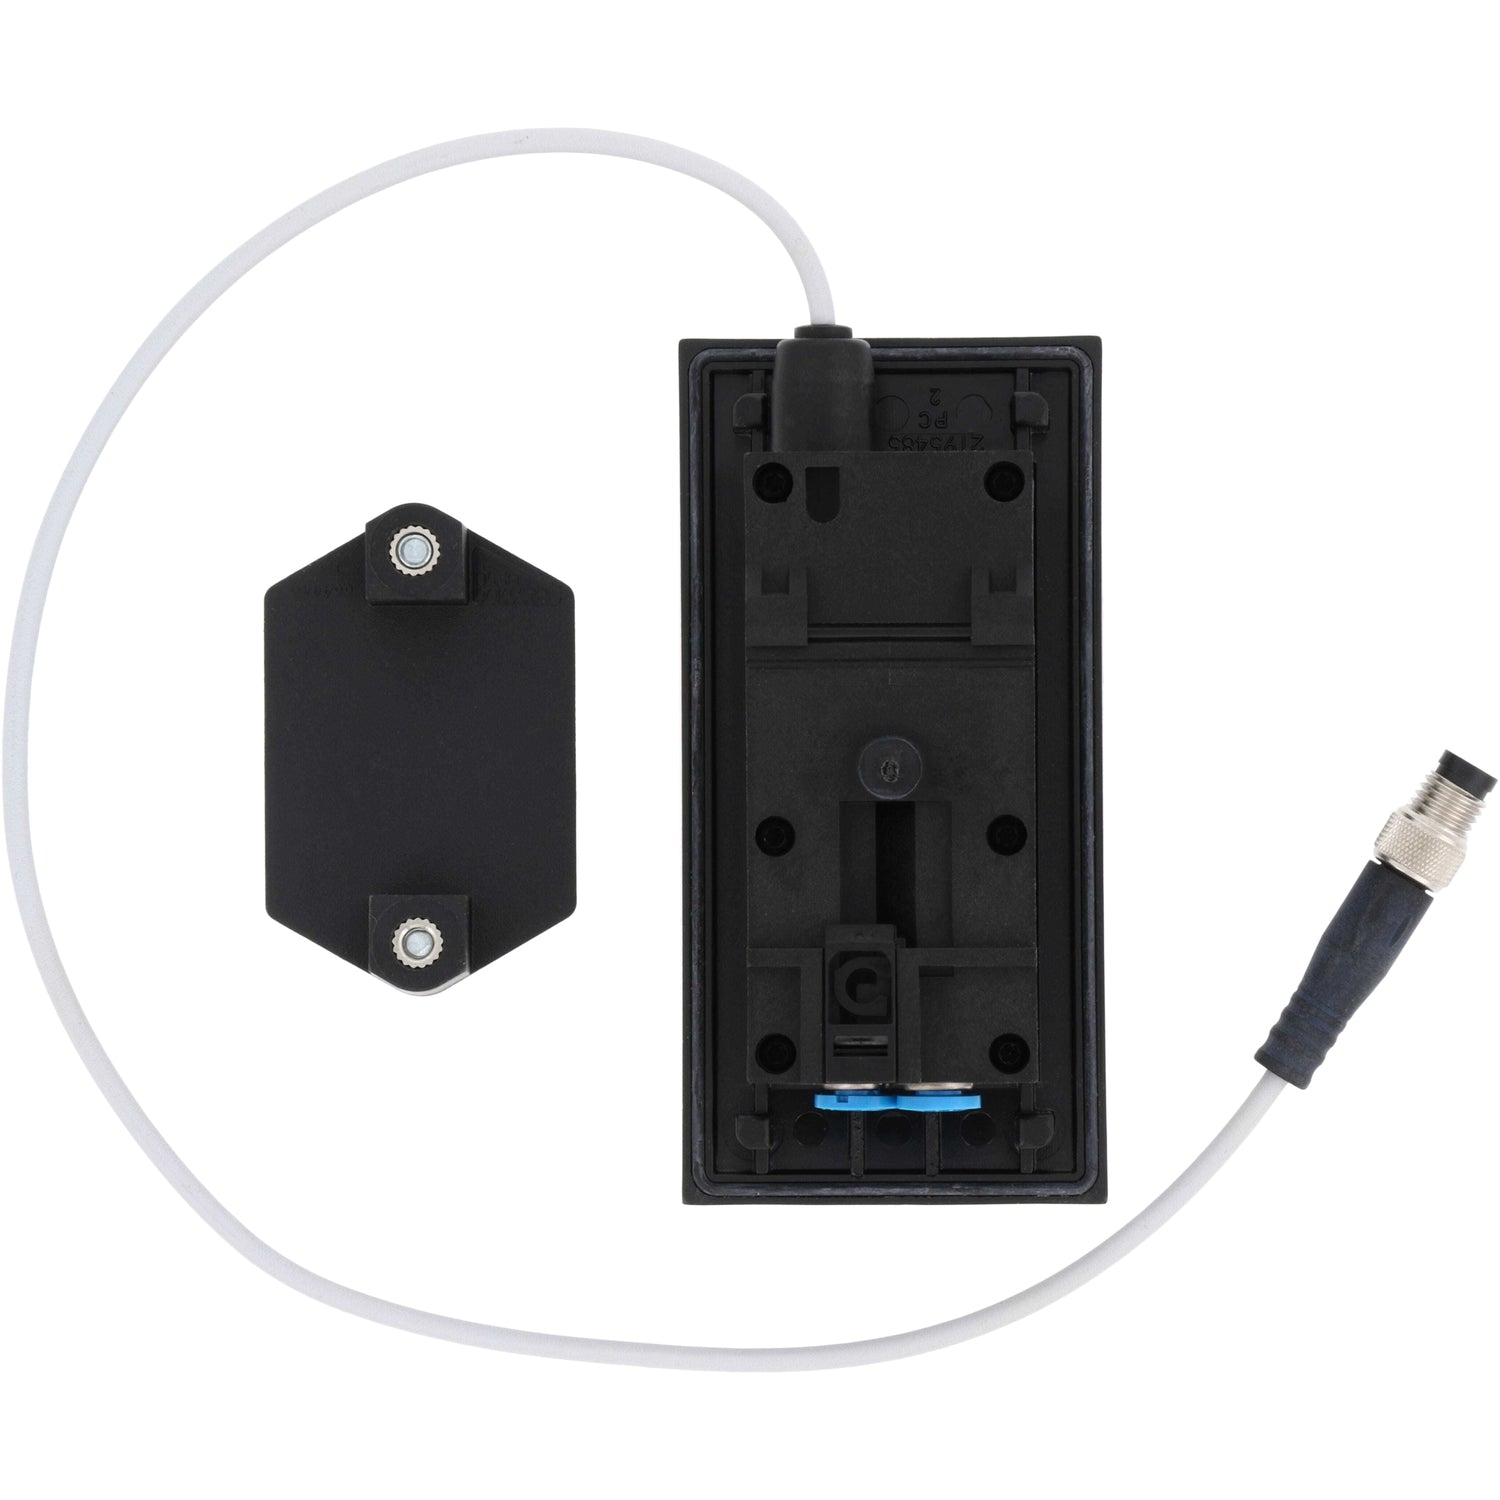 black rectangular pressure sensor with digital display, blue push buttons and mounting bracket on white background. 